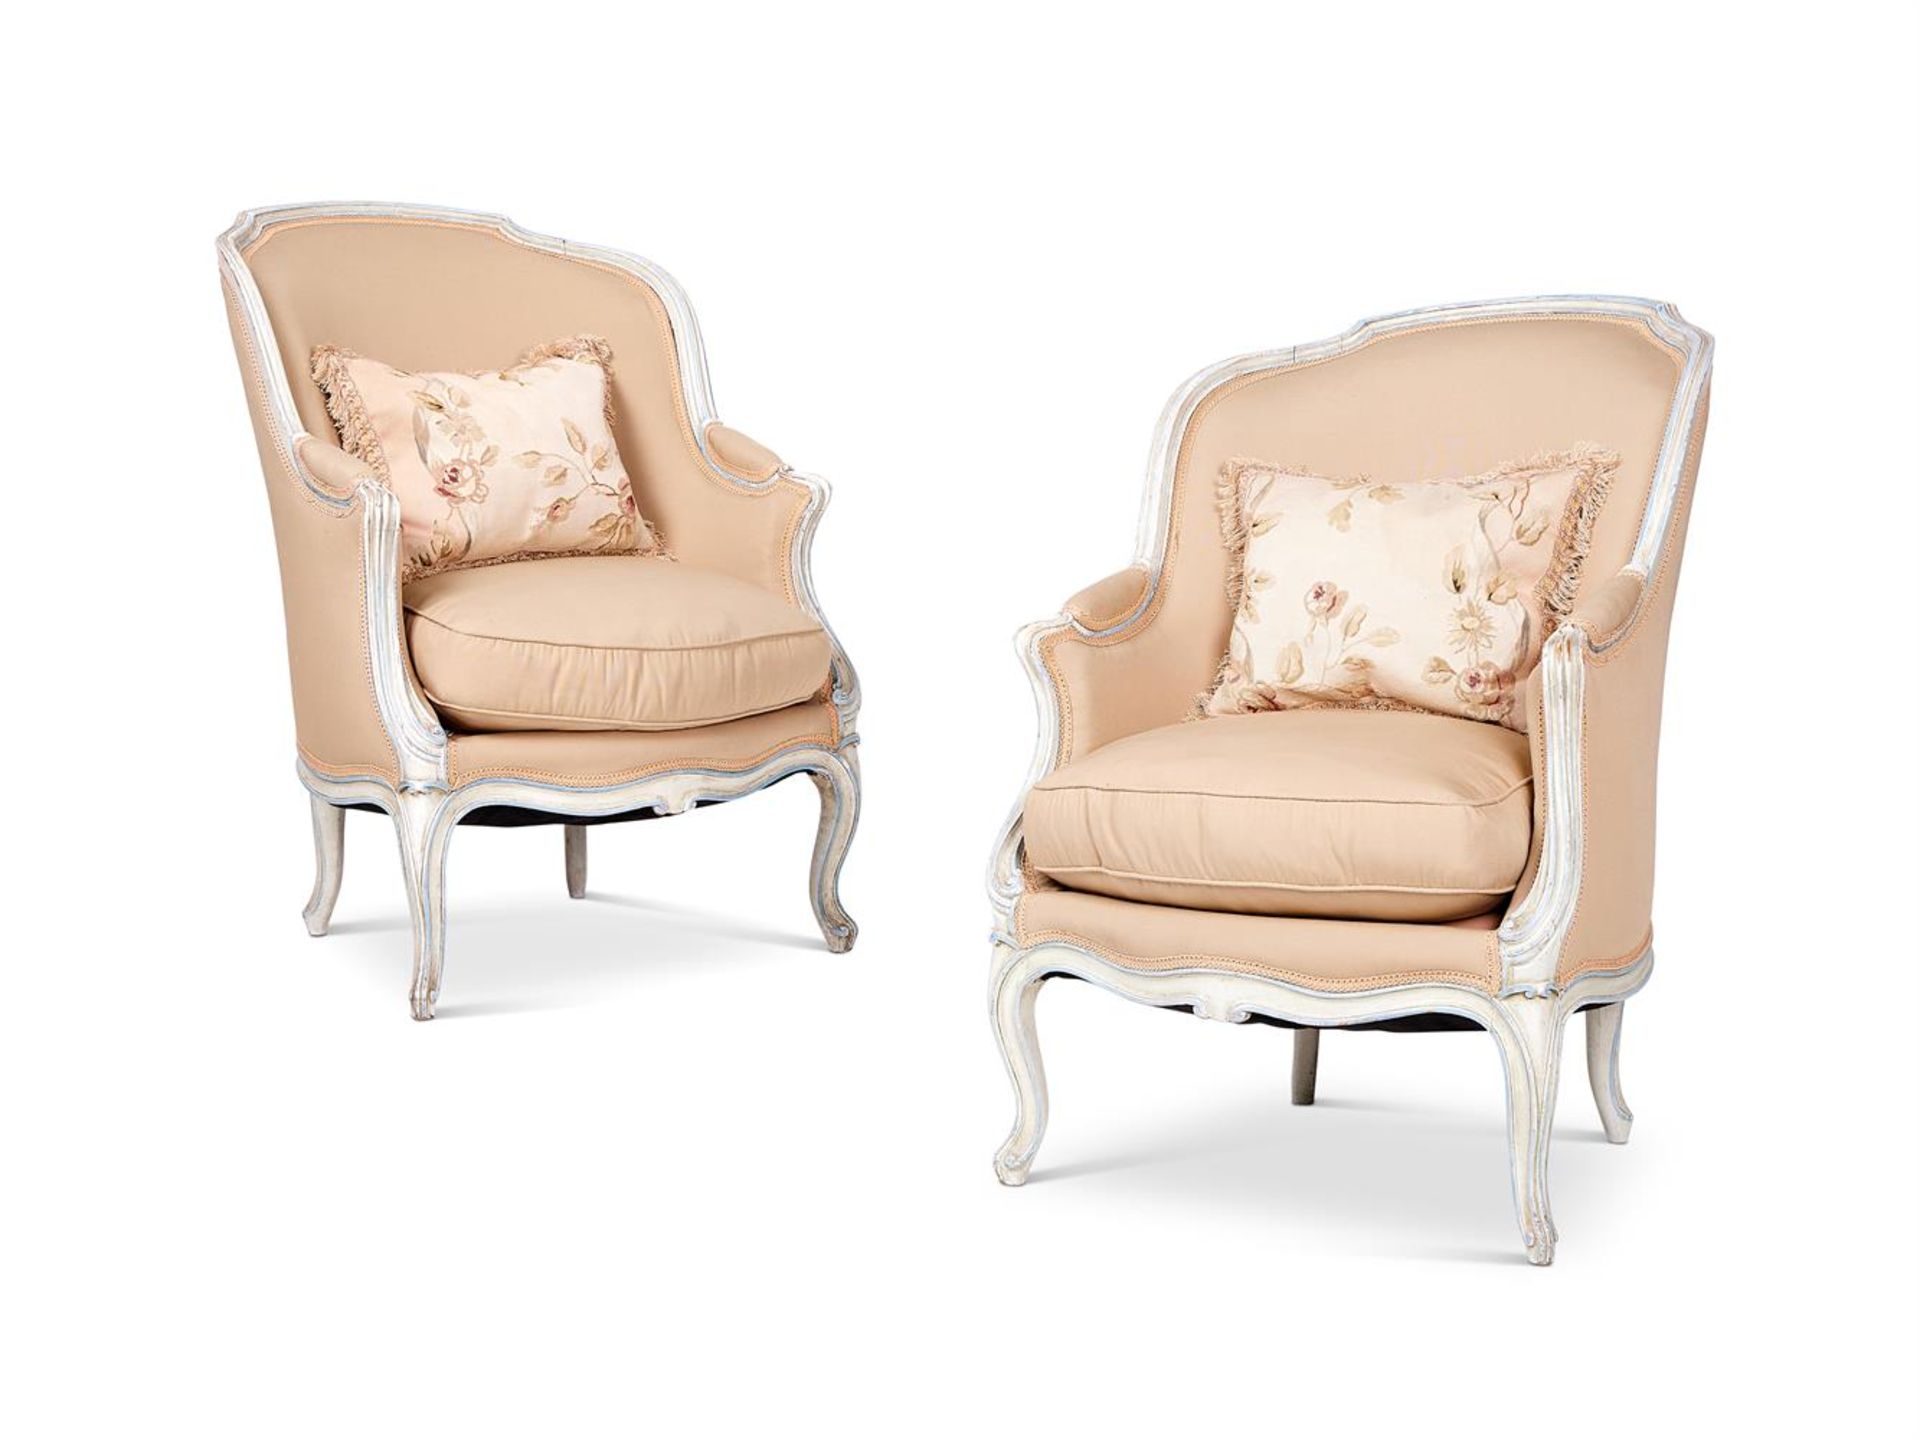 A PAIR OF CREAM UPHOLSTERED BERGERES IN LOUIS XV STYLE, LATE 19TH CENTURY